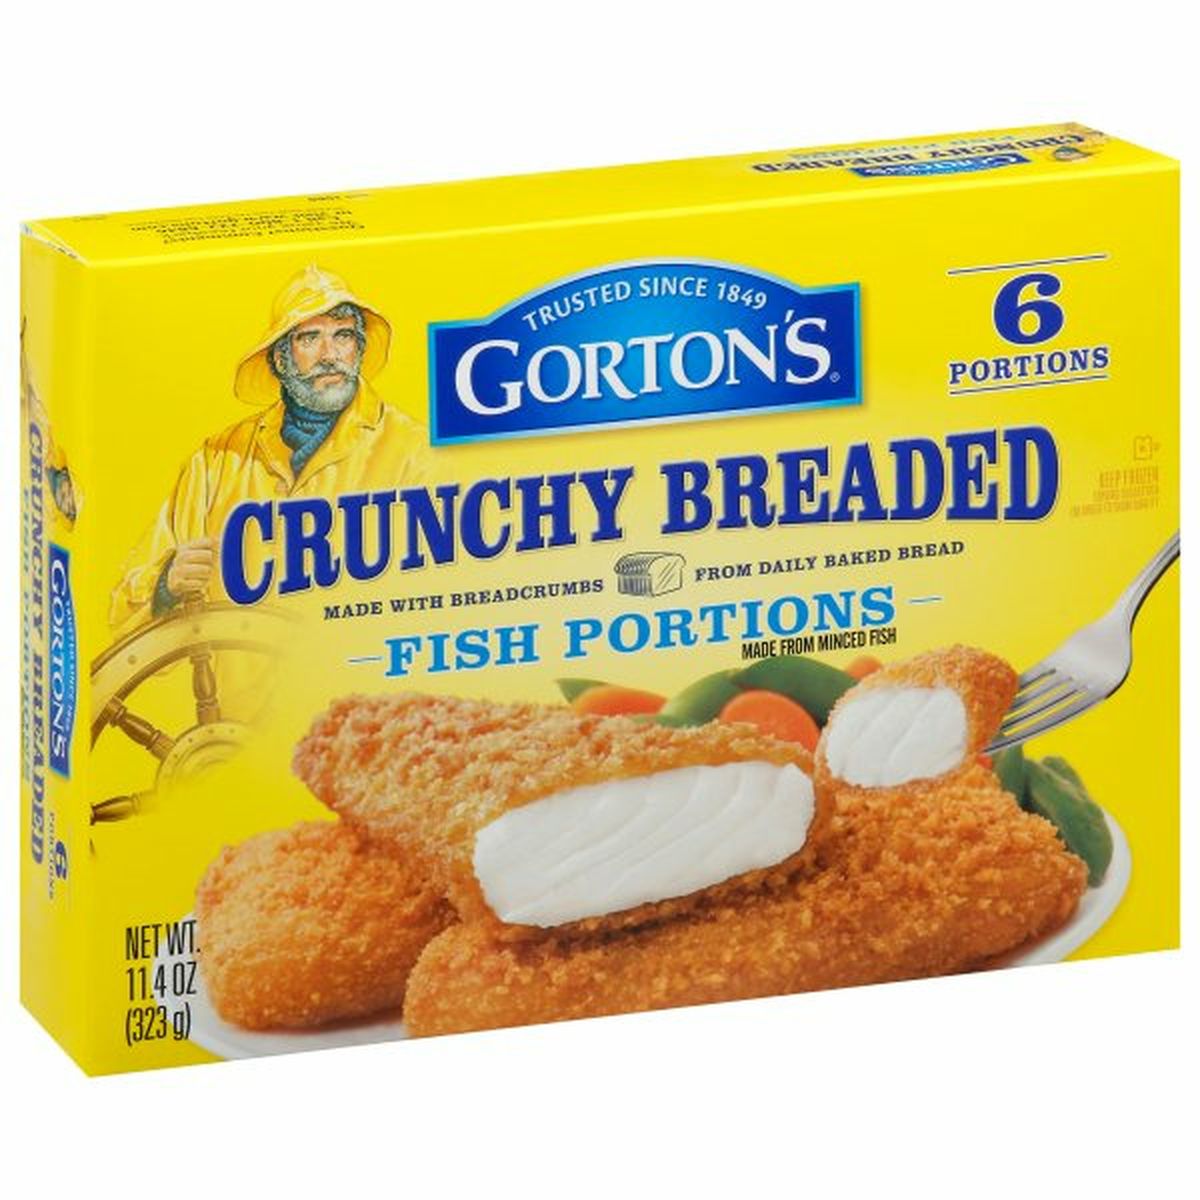 Calories in Gorton's Fish Portions, Crunchy Breaded